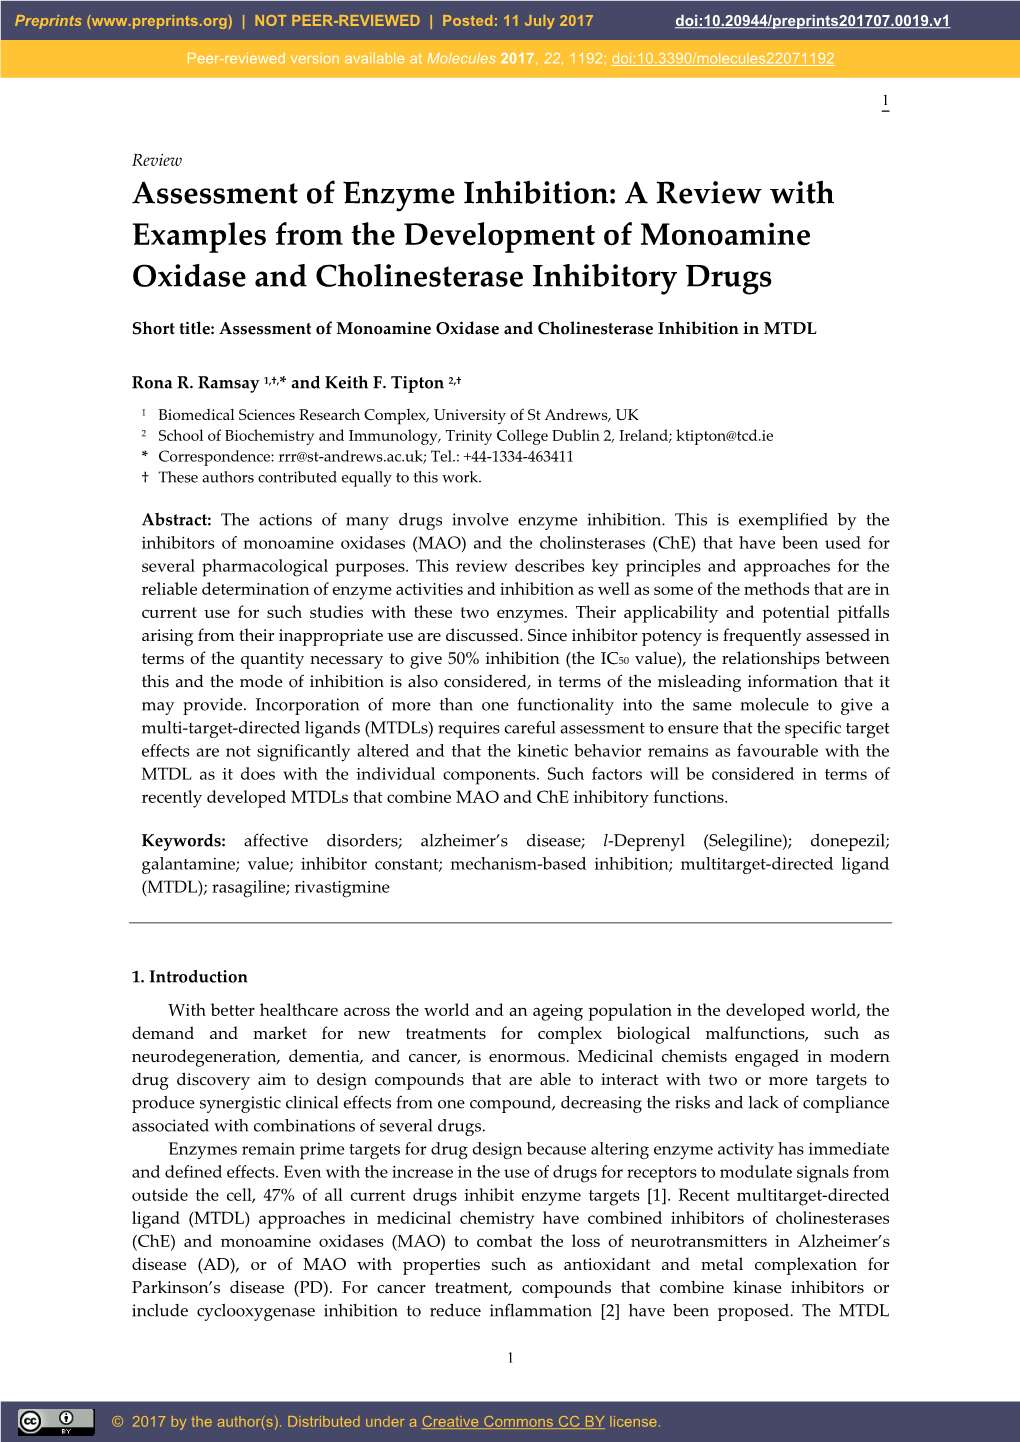 Assessment of Enzyme Inhibition: a Review with Examples from the Development of Monoamine Oxidase and Cholinesterase Inhibitory Drugs